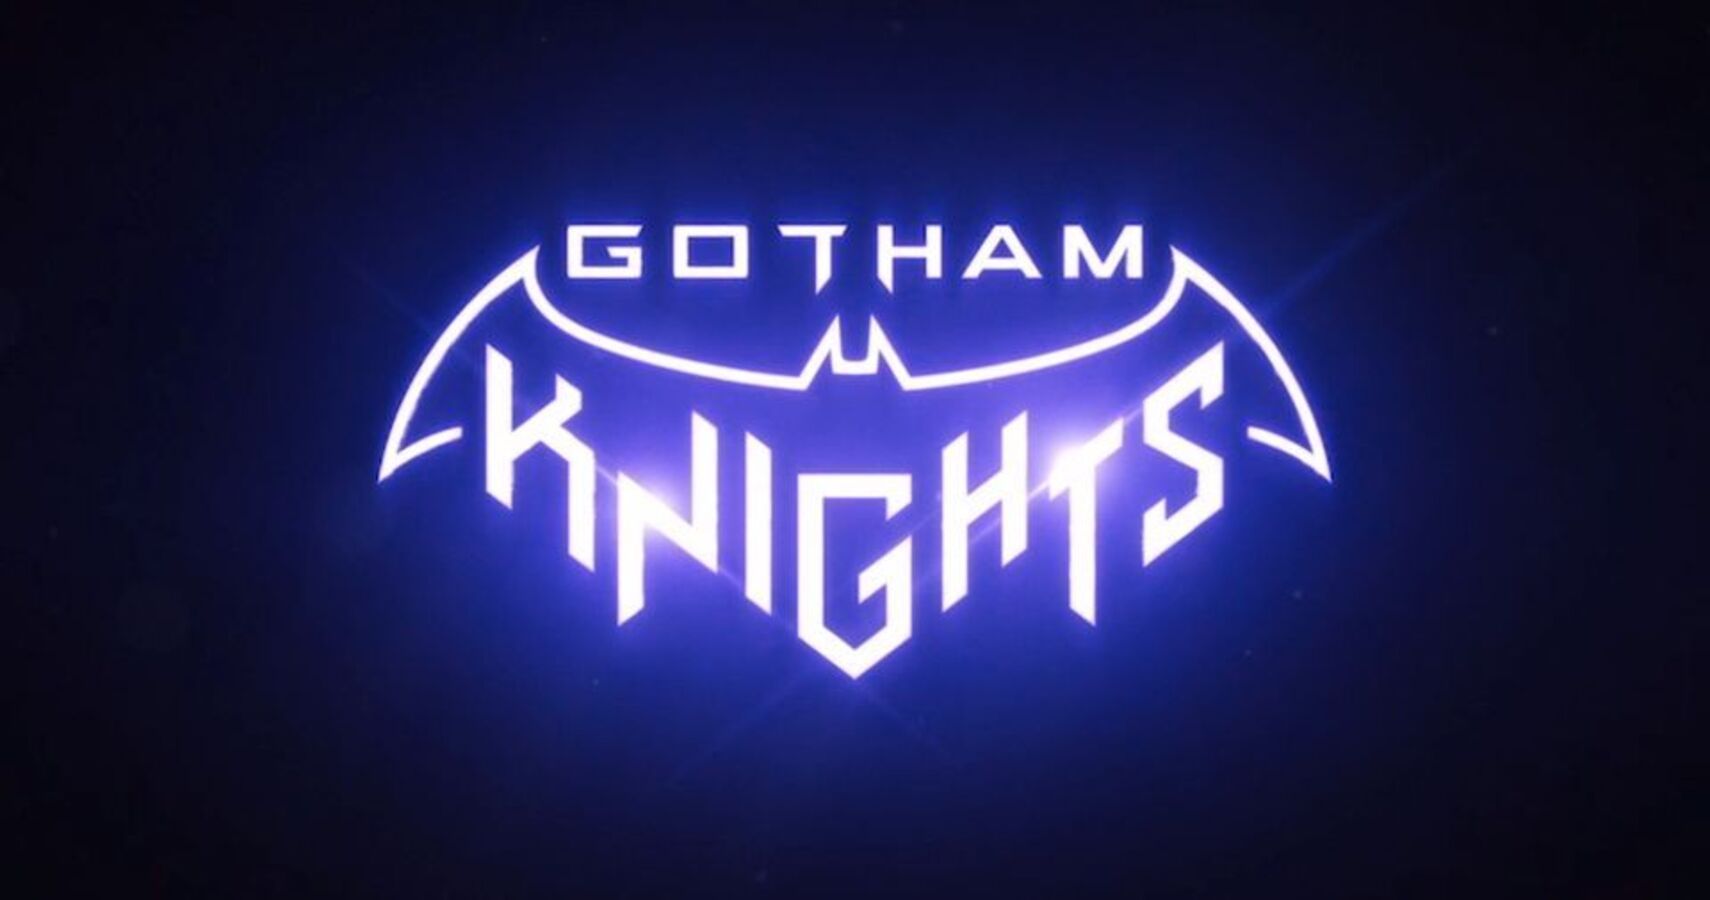 when will gotham knights be released